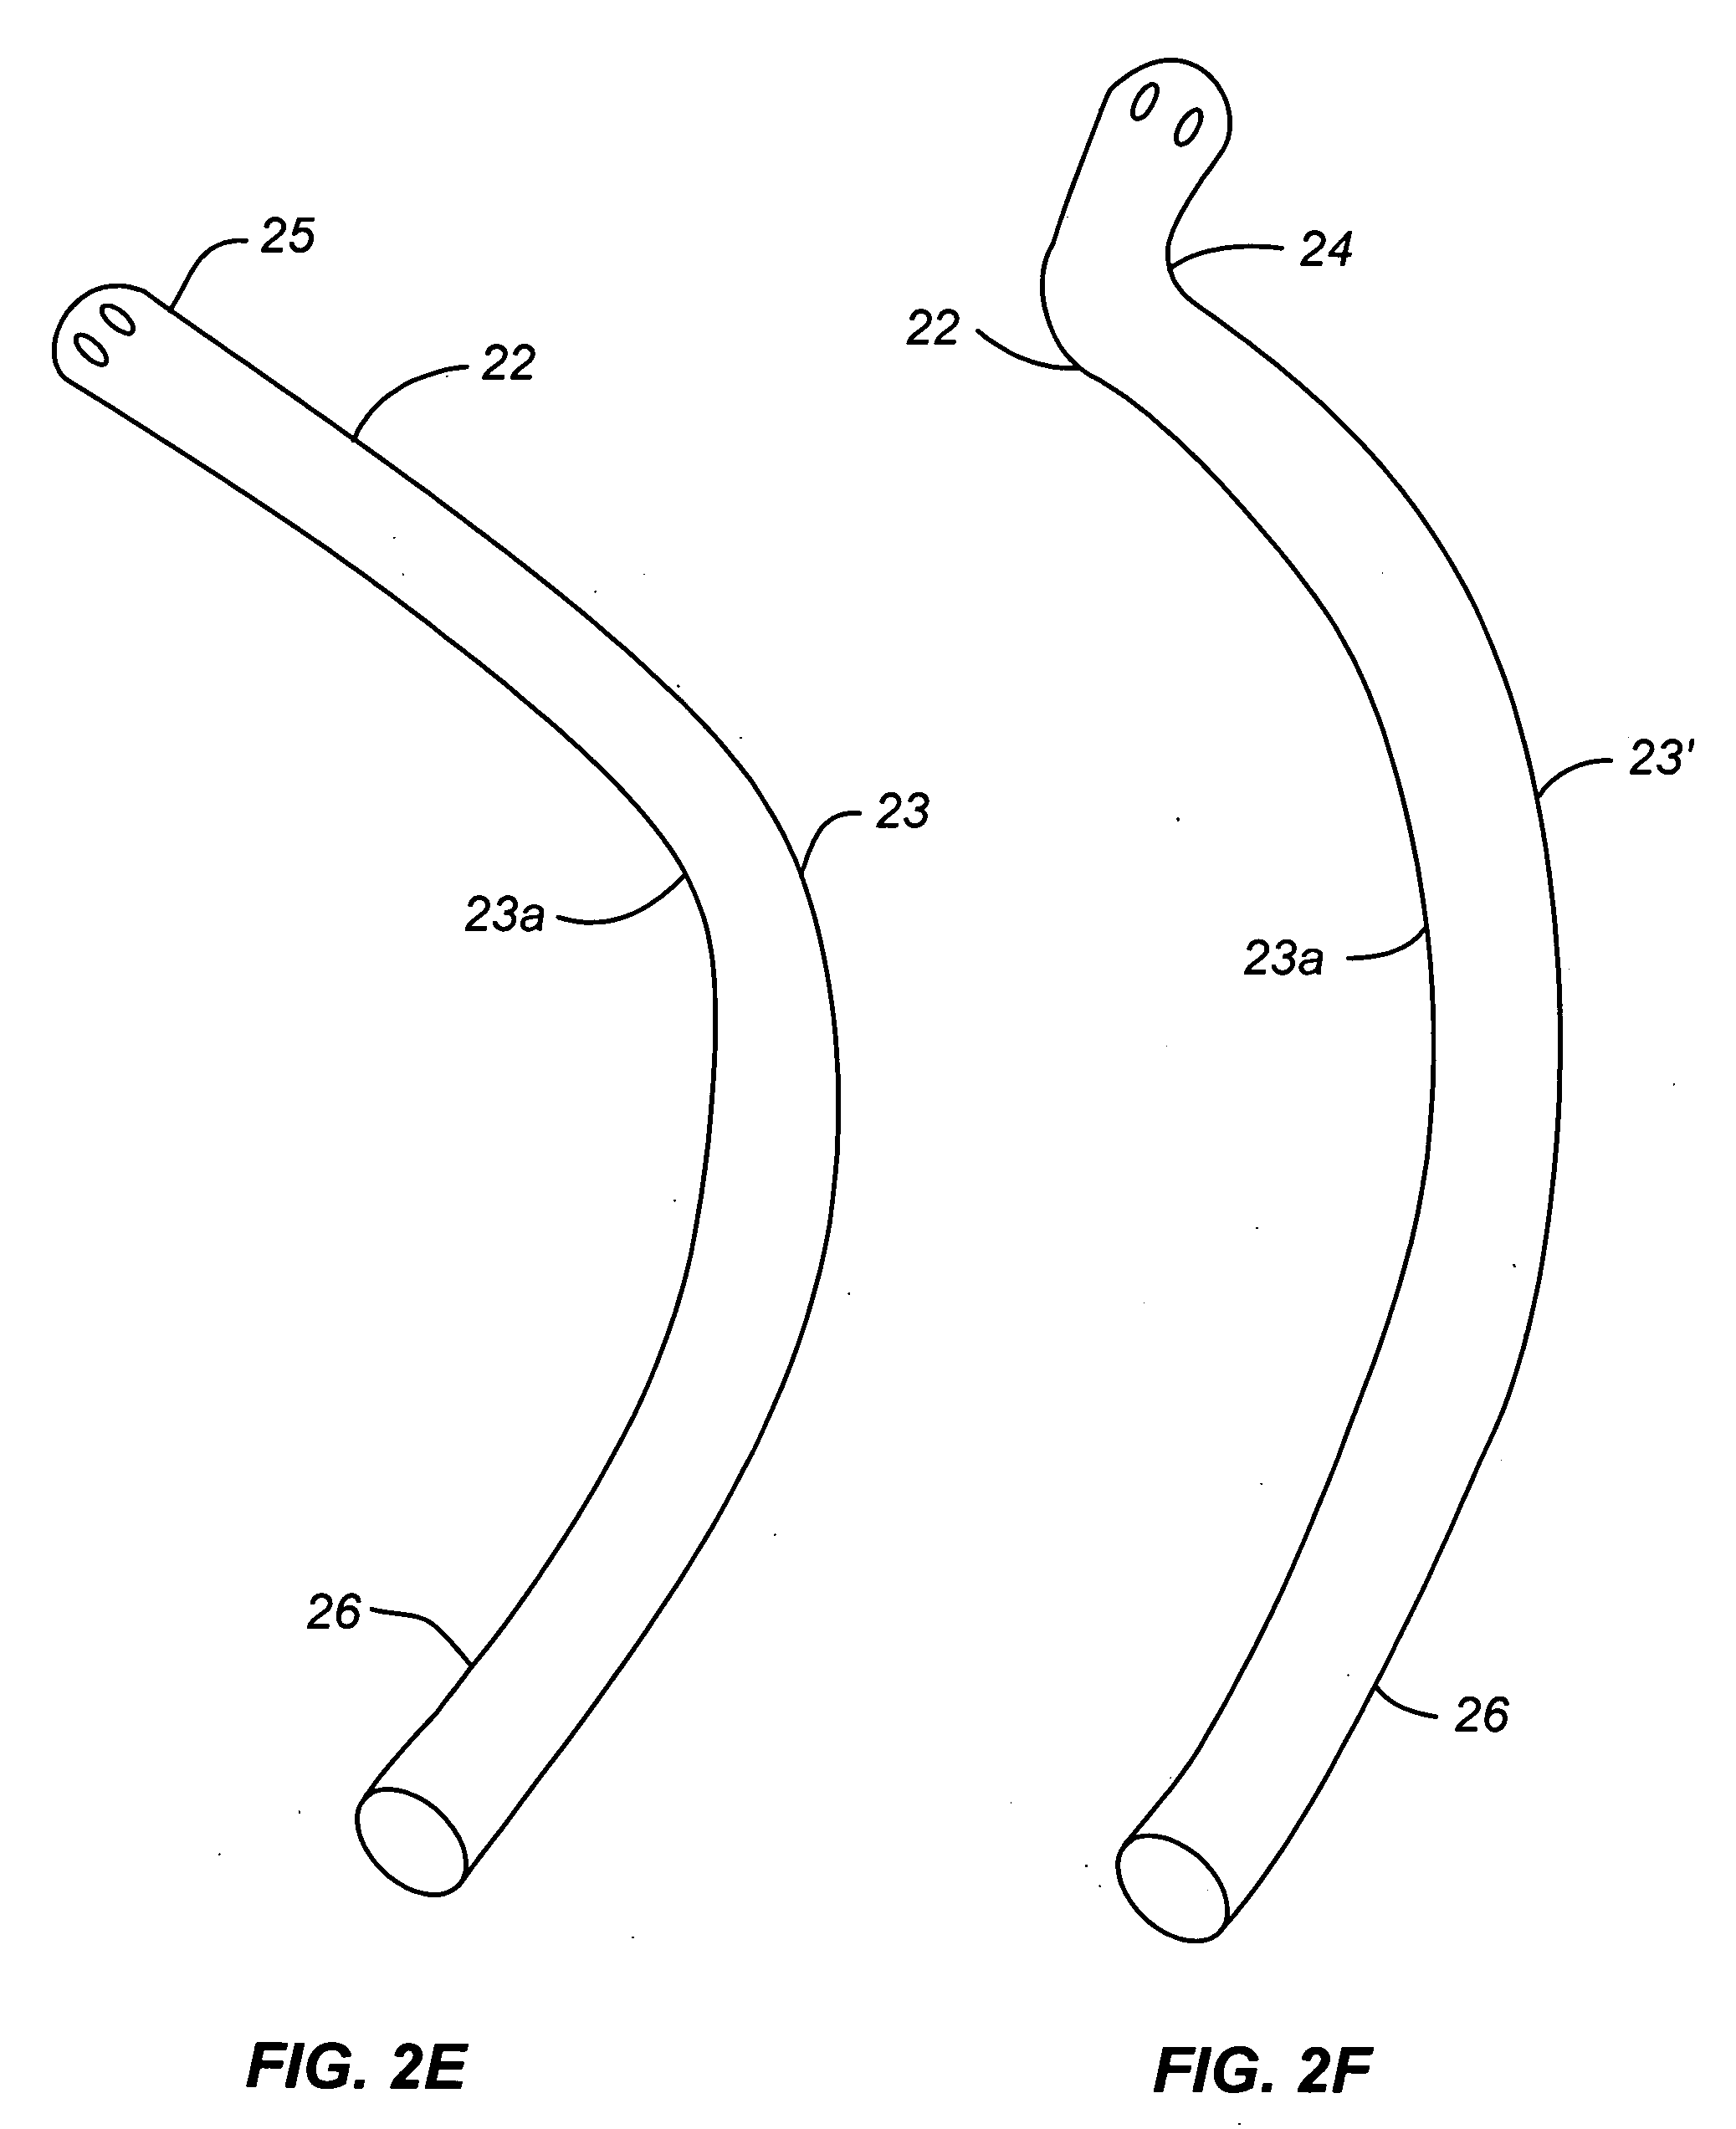 Activated polymer articulated instruments and methods of insertion